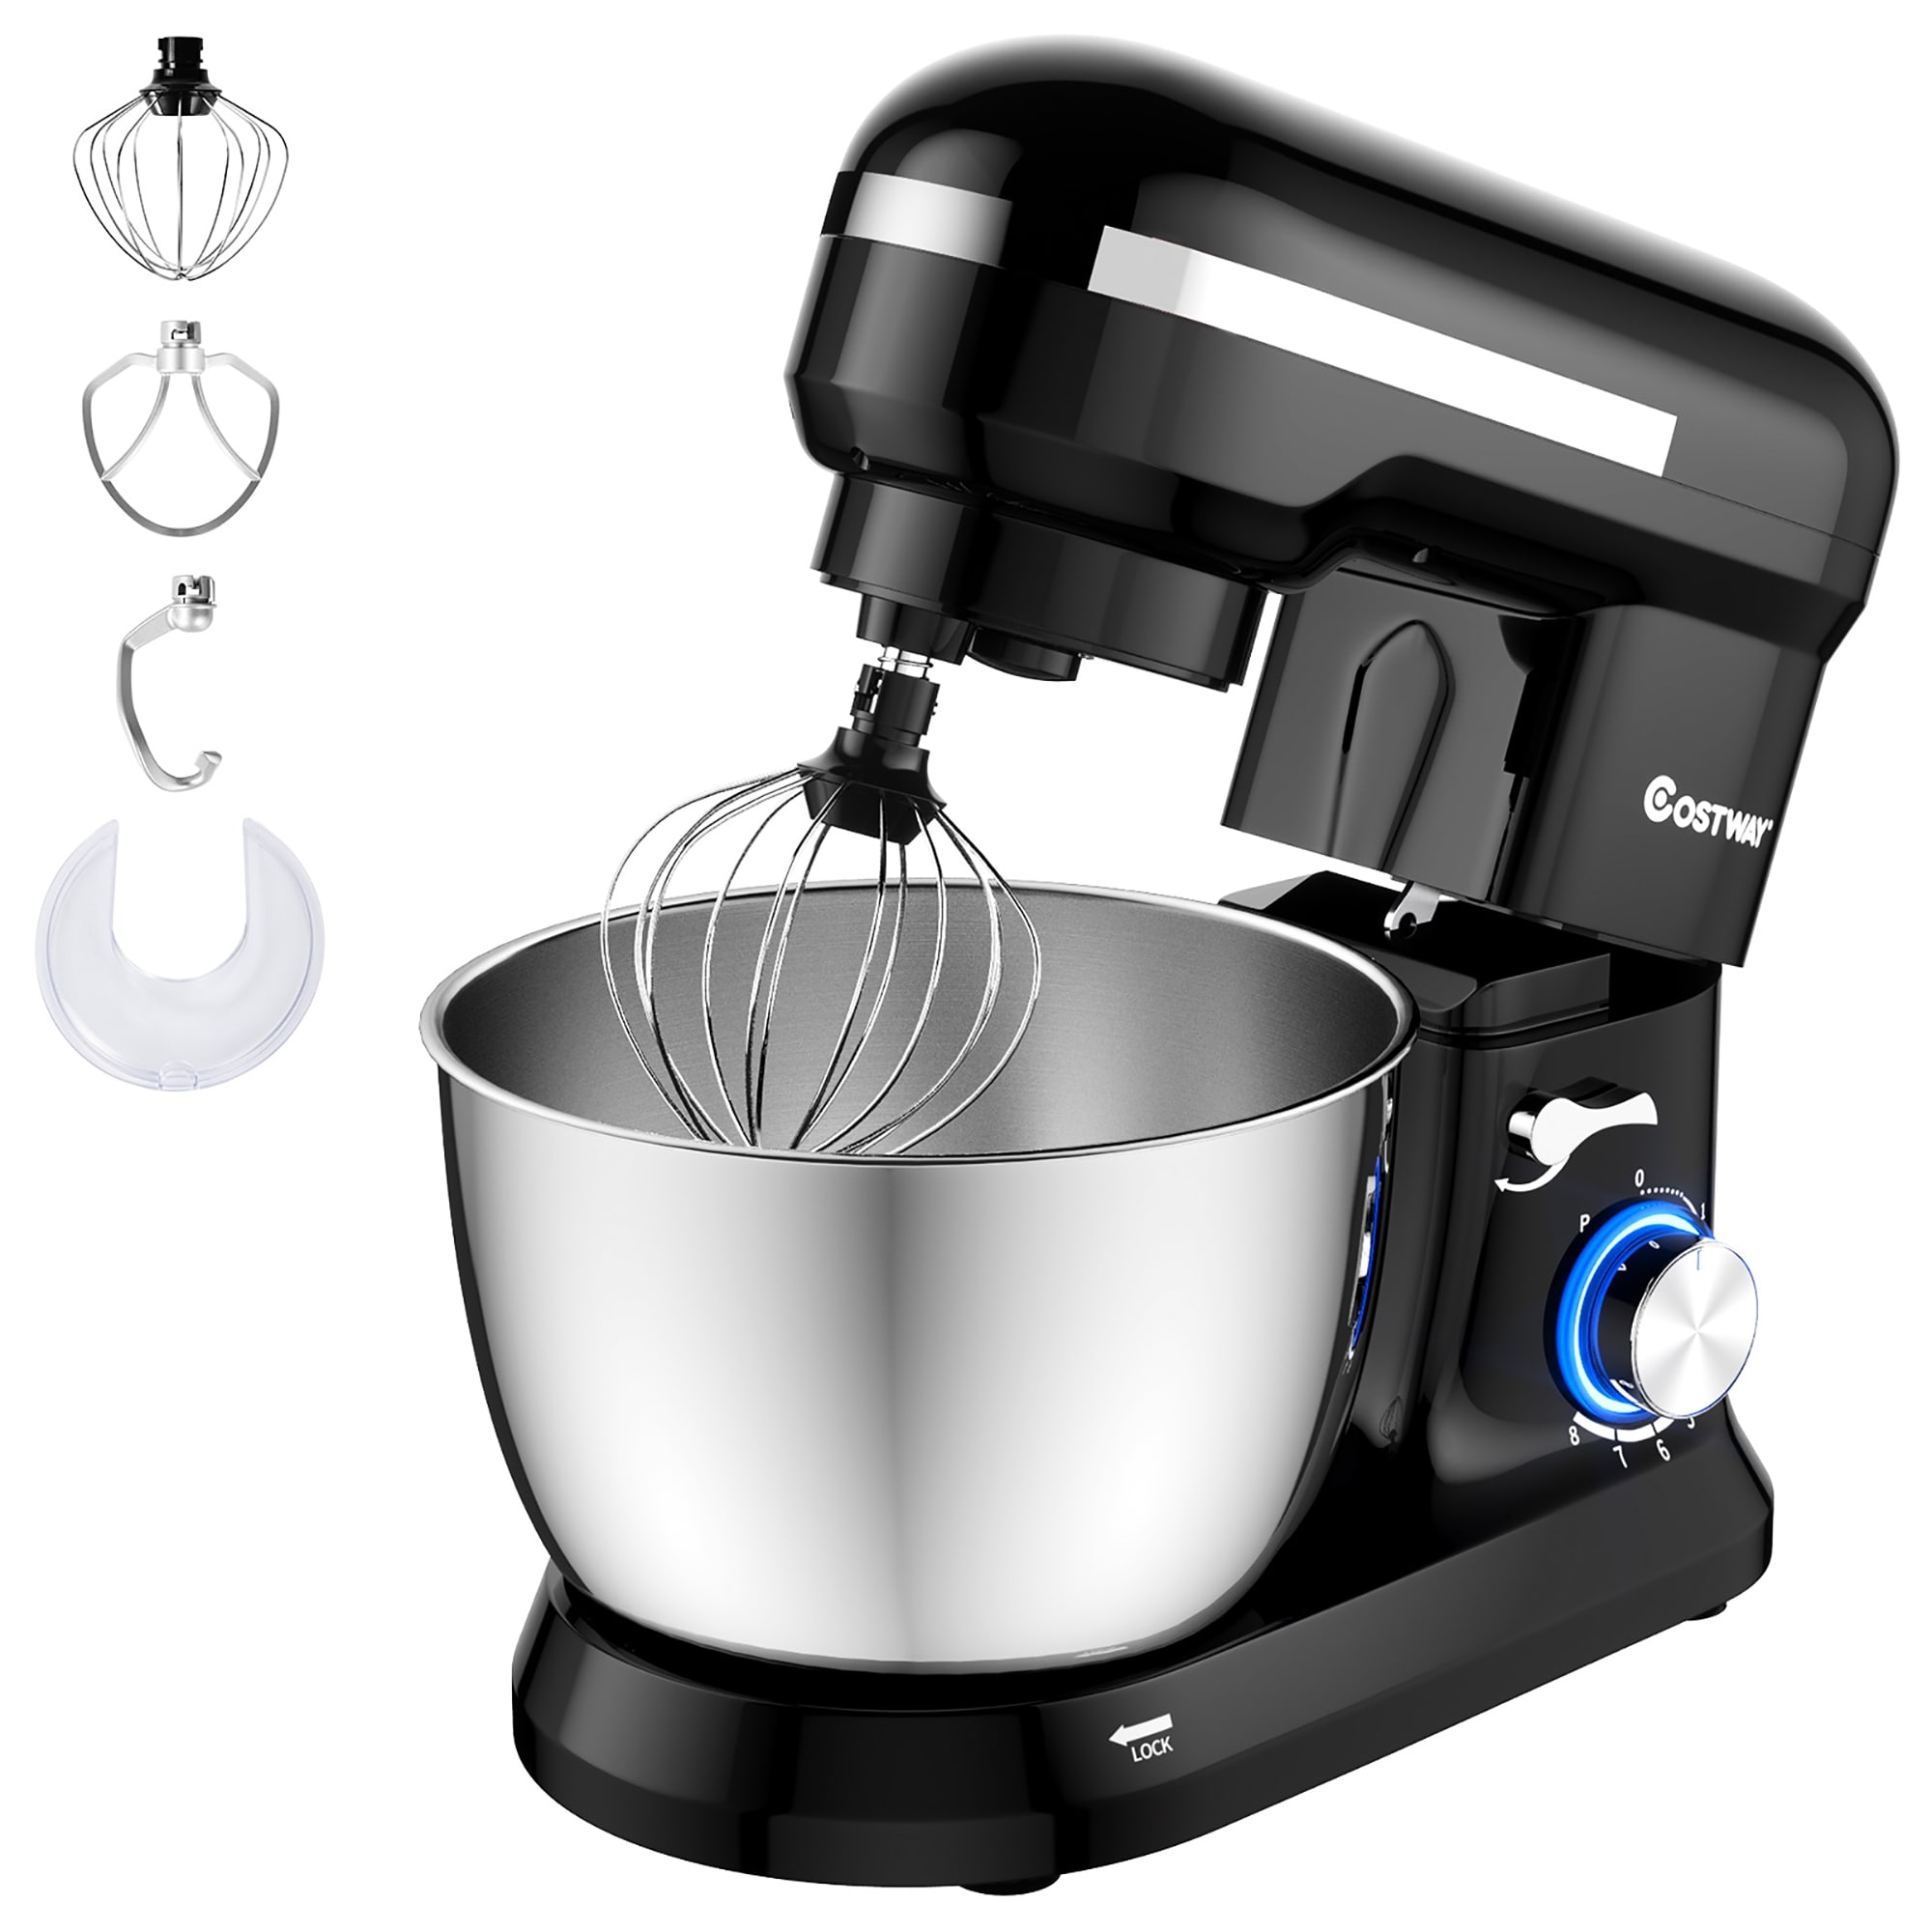 https://ak1.ostkcdn.com/images/products/is/images/direct/58b919b3bfeb70ee58137da79c2cfd98dae80afe/Costway-4.8-QT-Stand-Mixer-8-speed-Electric-Food-Mixer-w-Dough-Hook.jpg